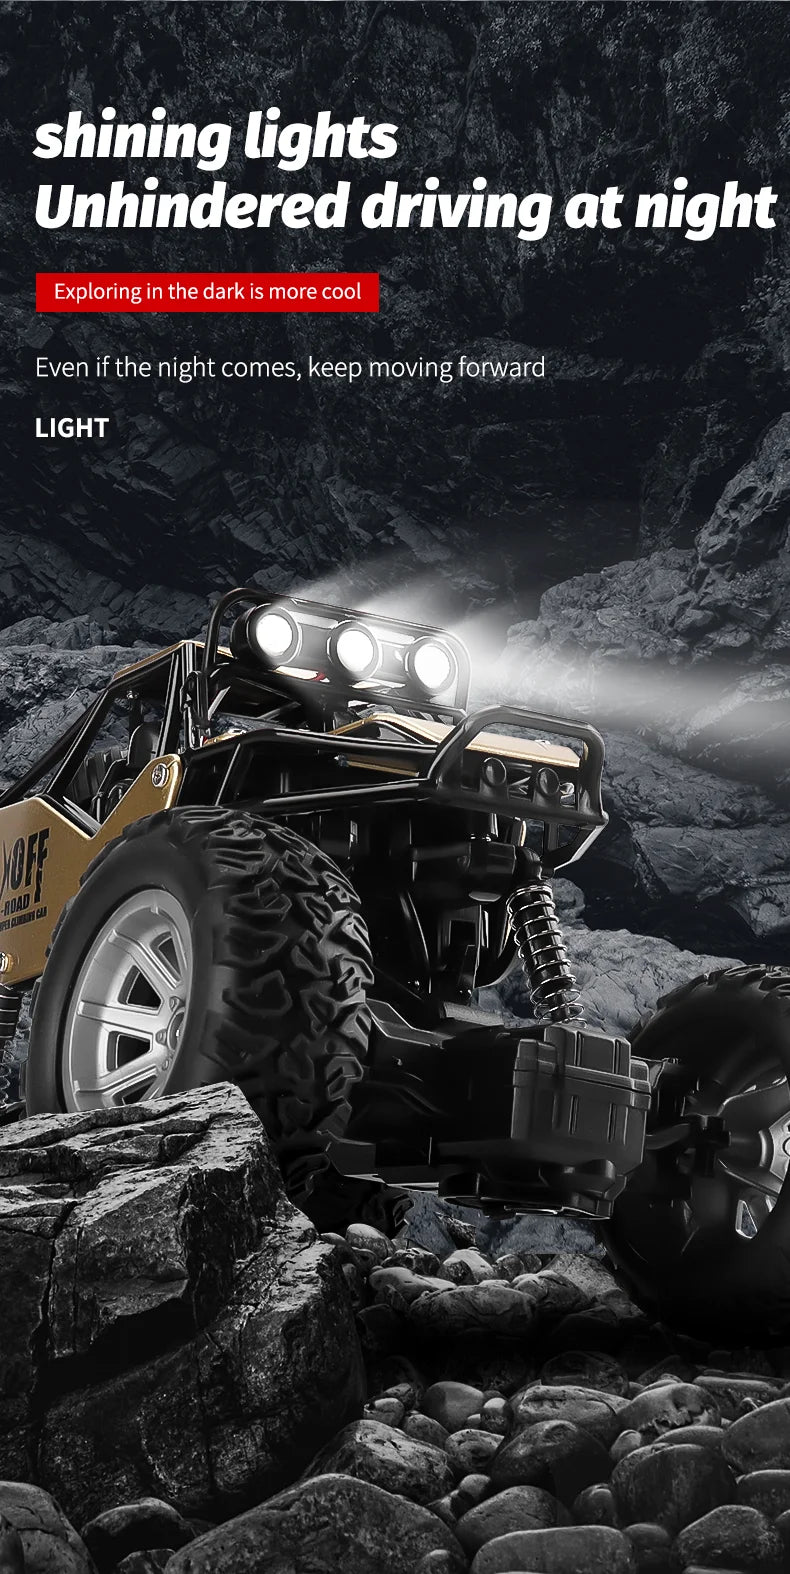 ZWN 1:20 2WD RC Car, shining lights Unhindered driving at night Exploring in the dark is more cool .